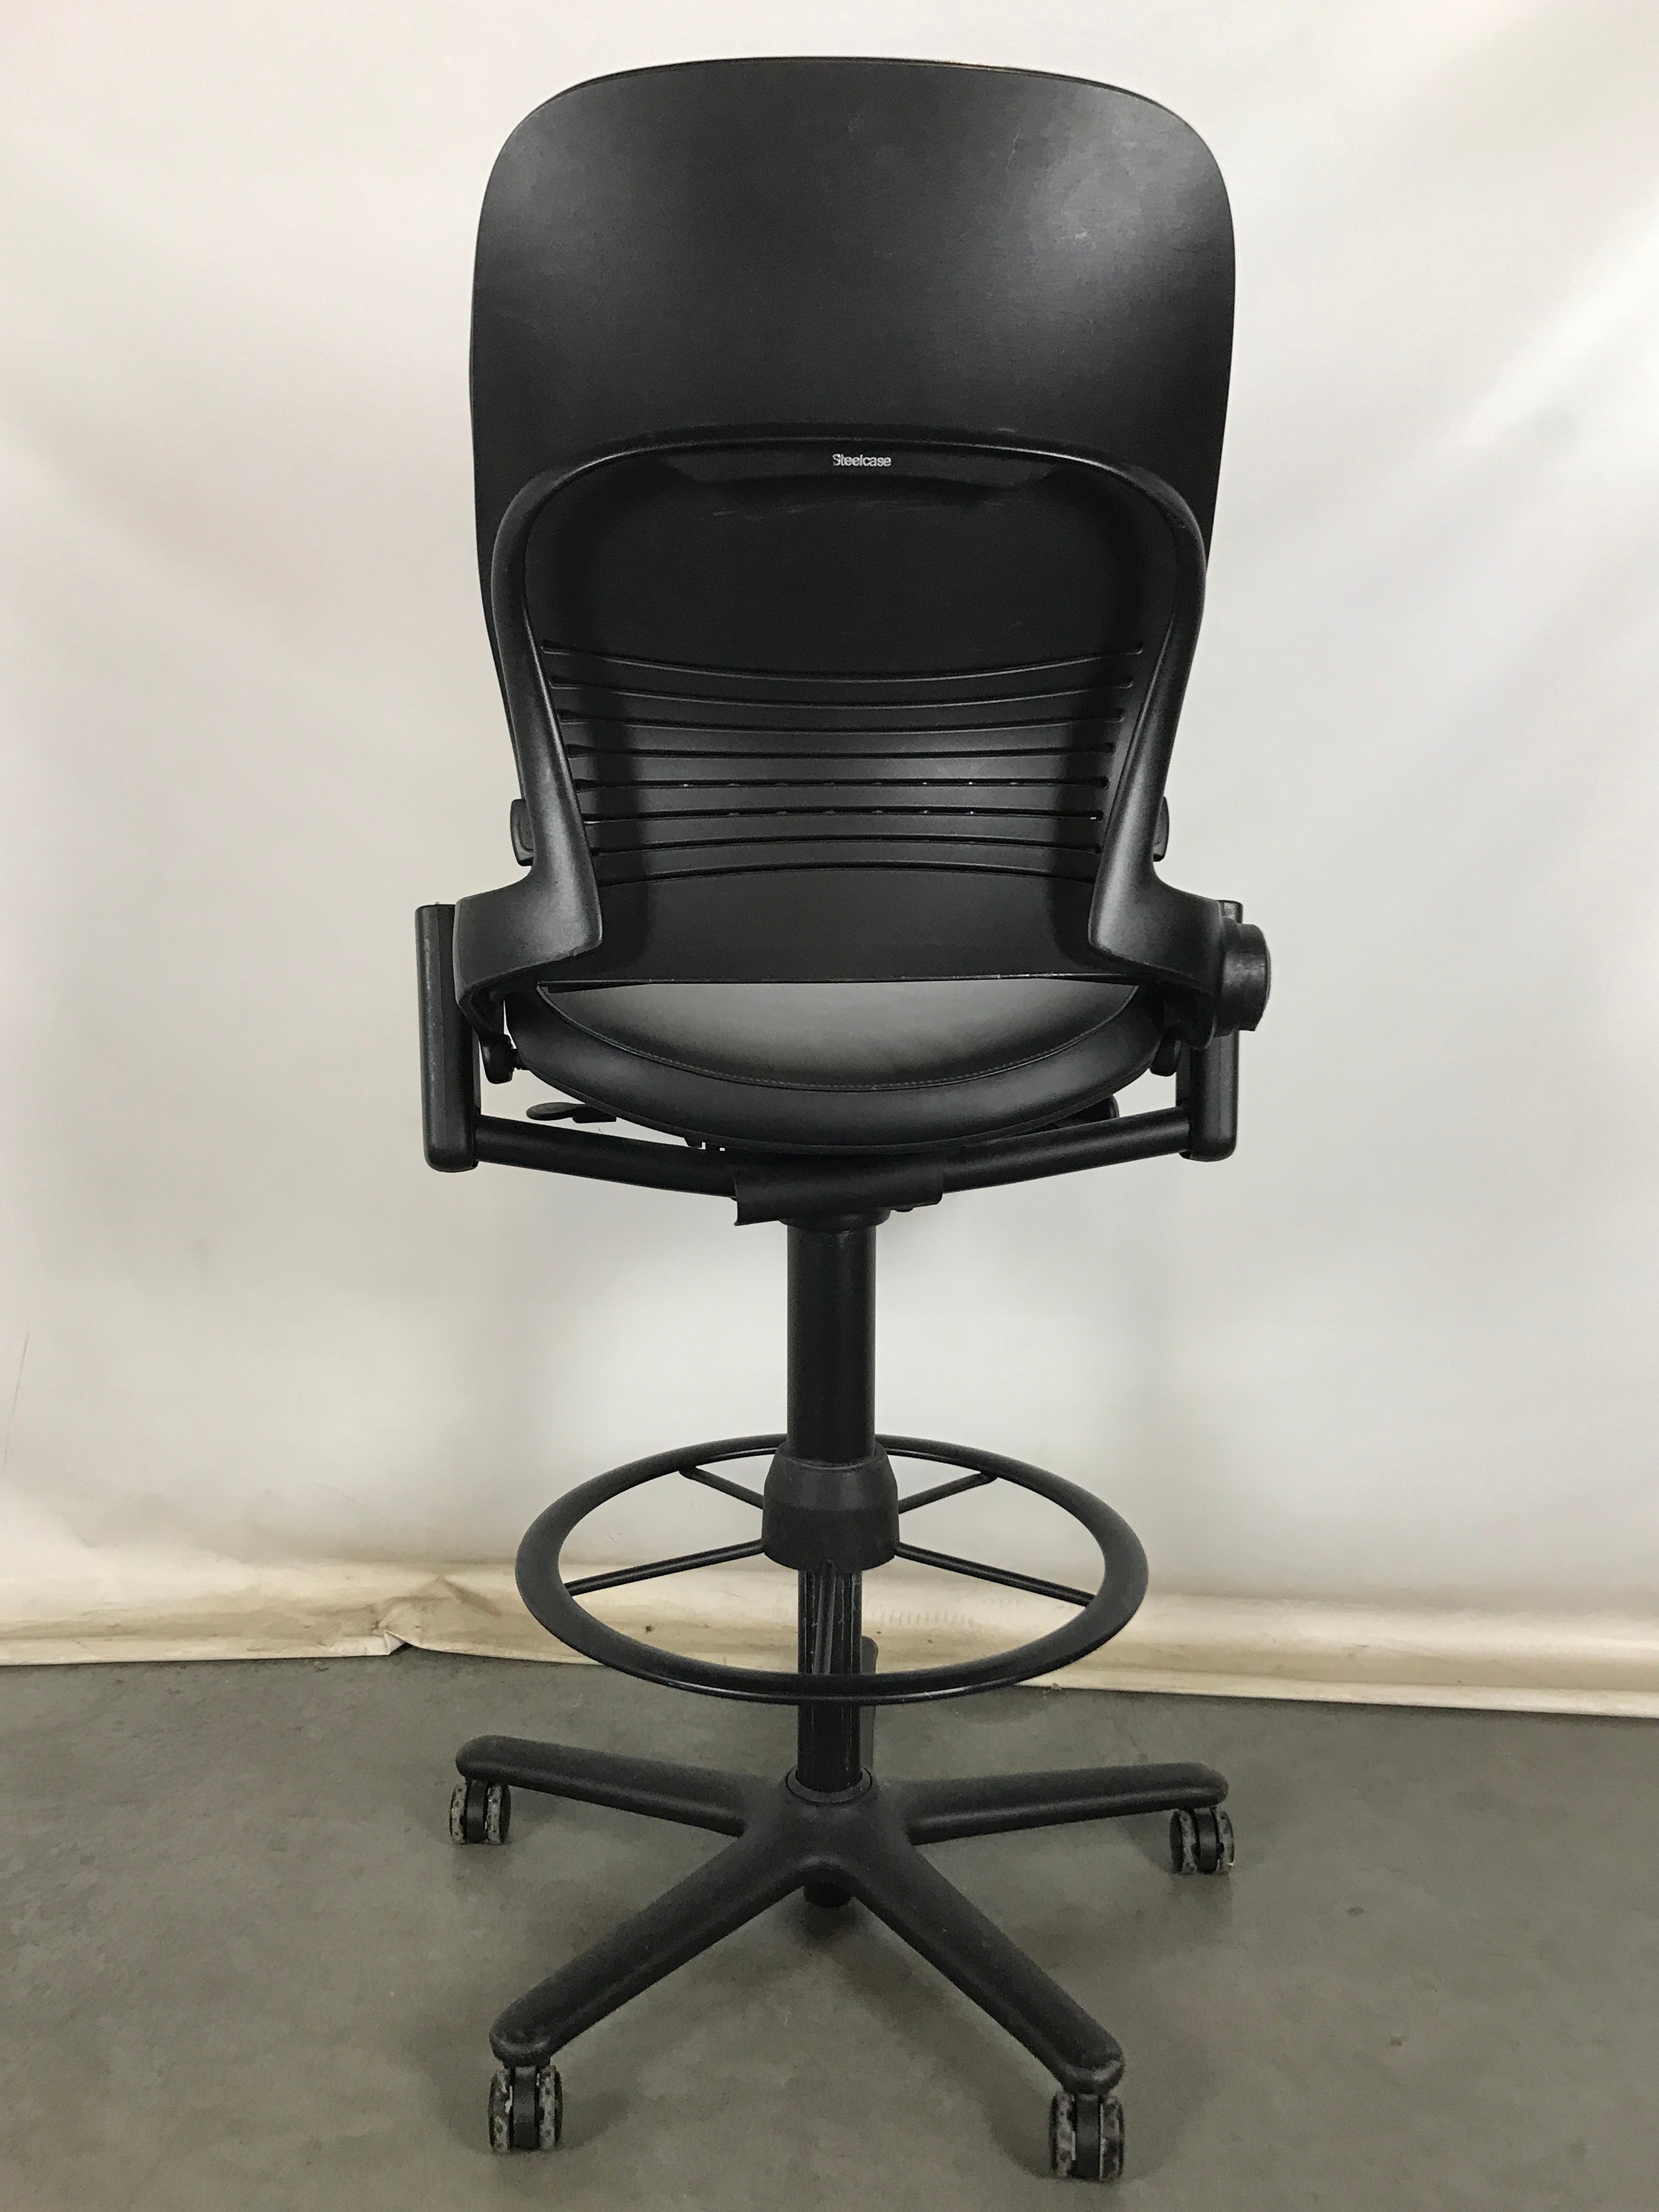 Steelcase Leap Adjustable Rolling Office Chair - Tall